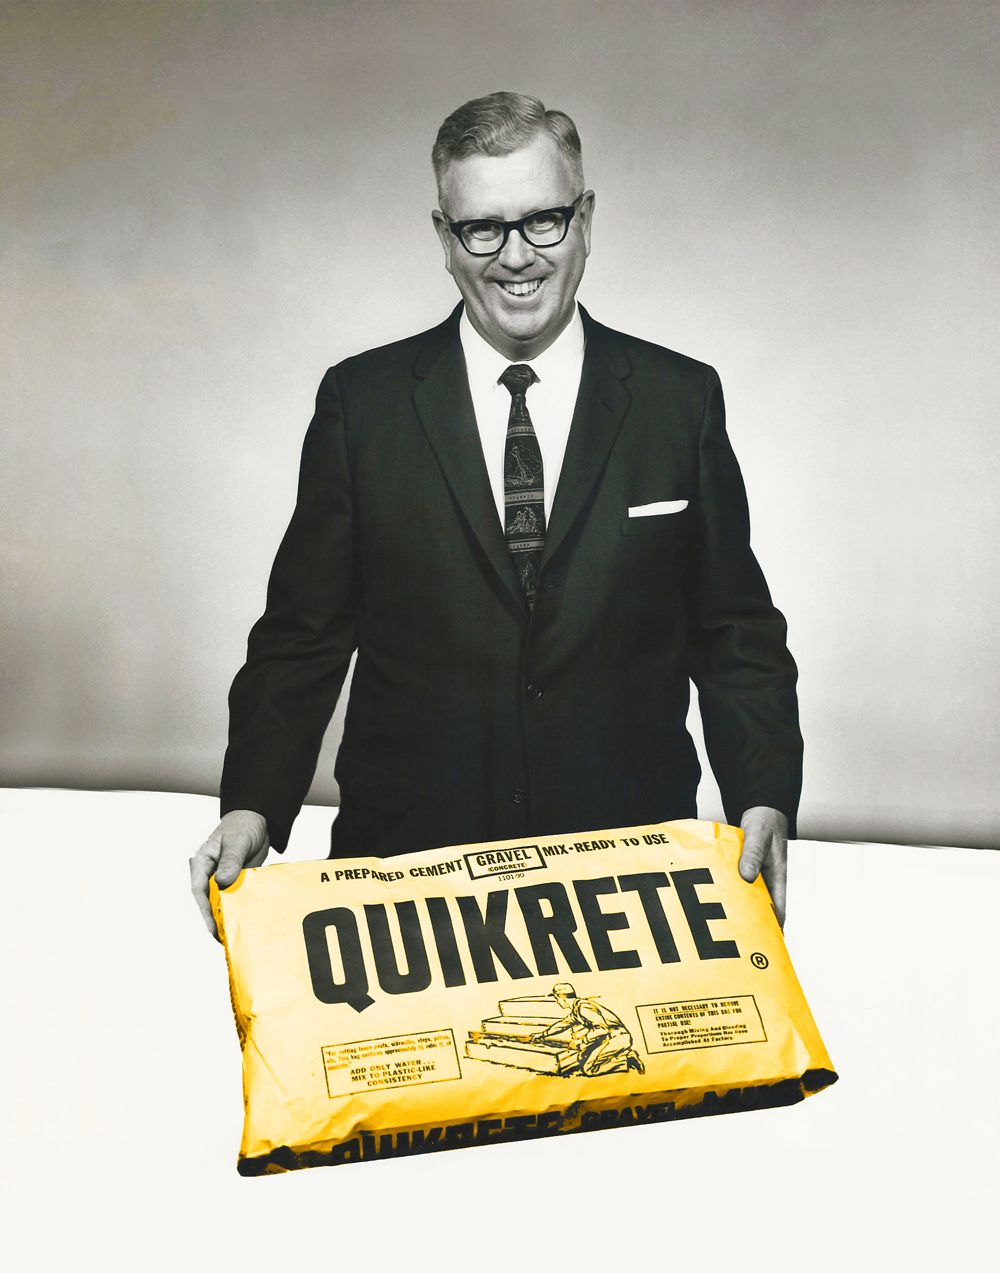 The QUIKRETE Companies founder, Gene Winchester